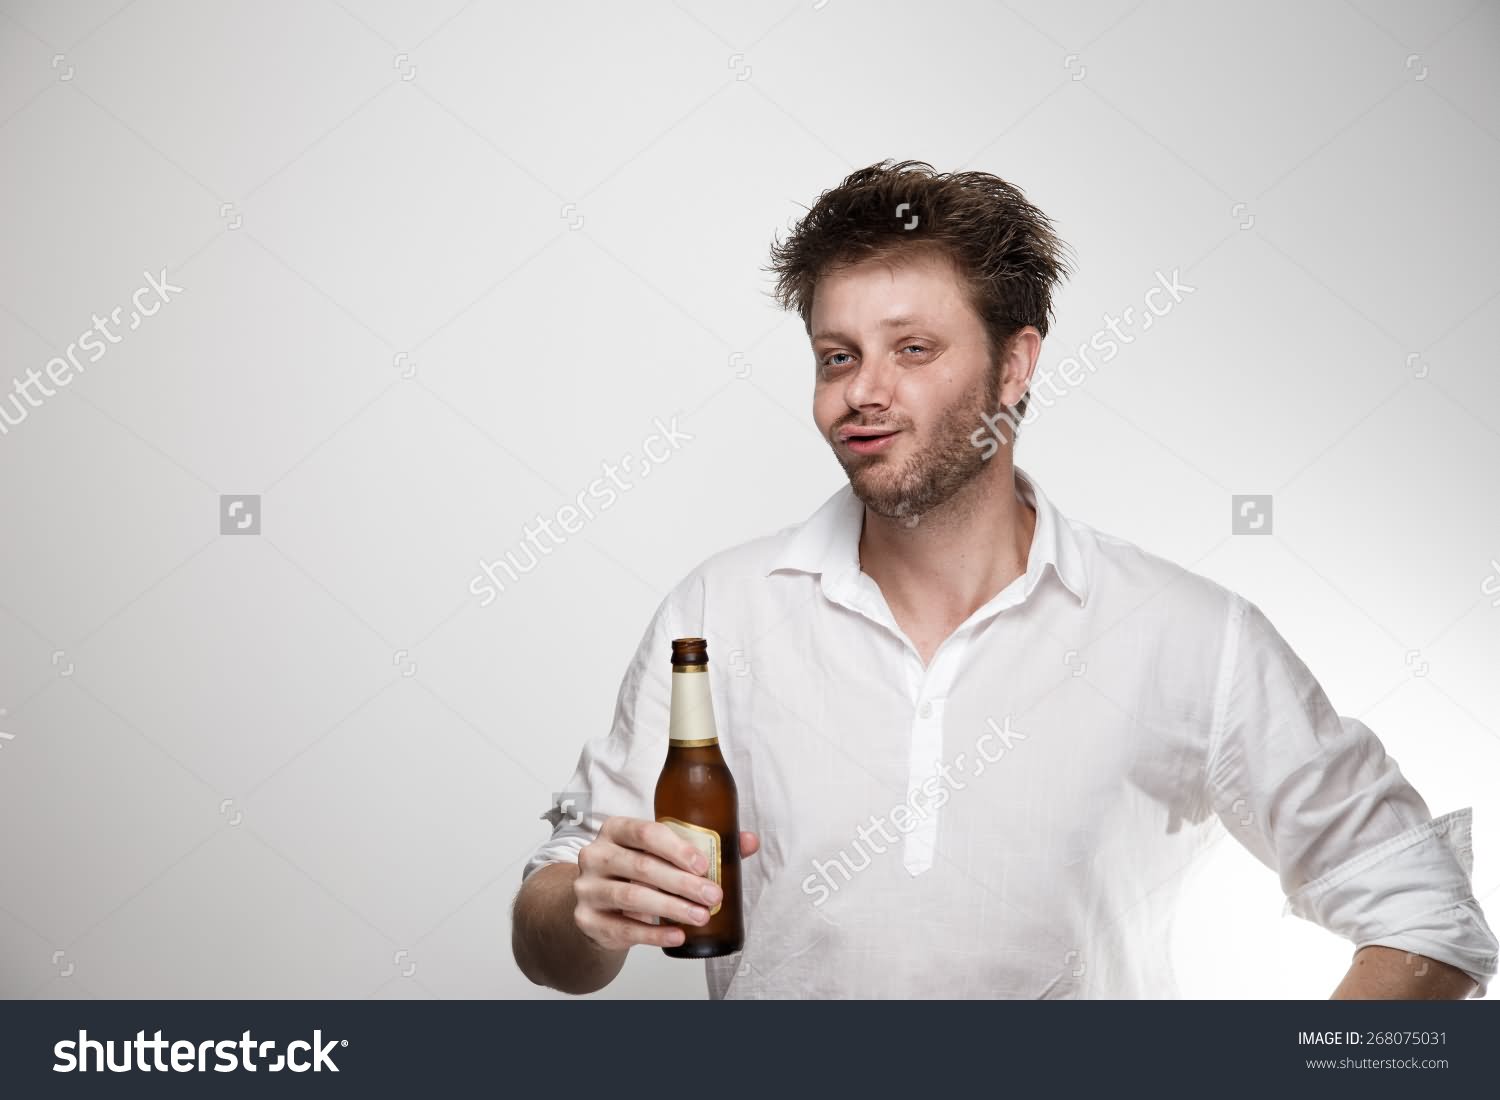 Man Drinking Beer With Weird Face Funny Image